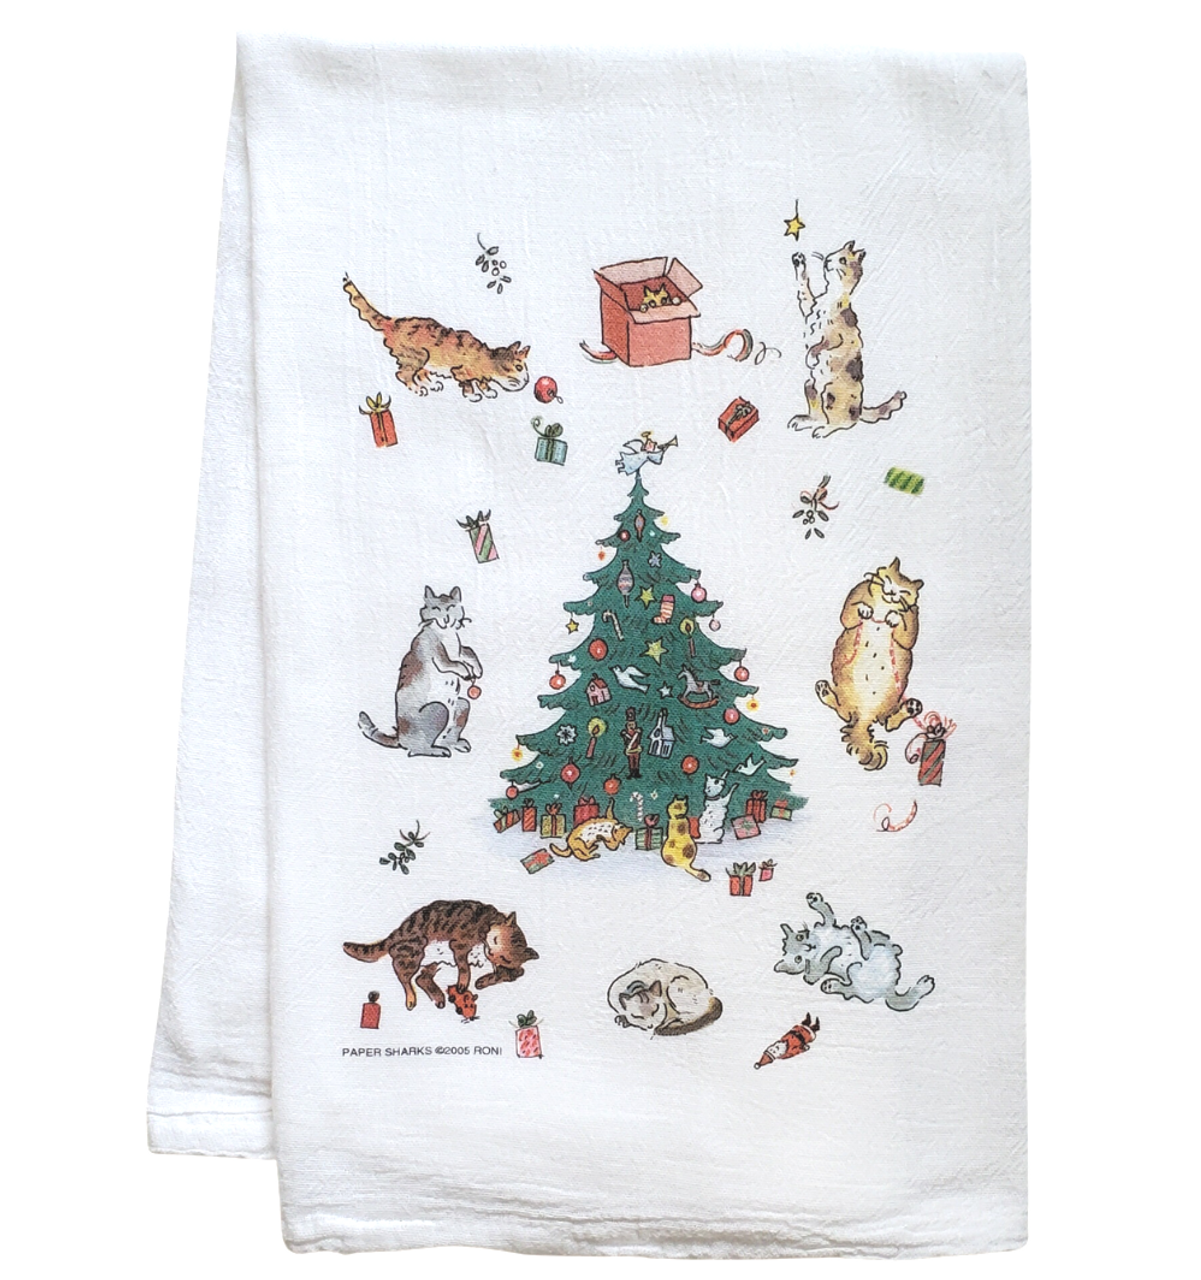 https://cdn11.bigcommerce.com/s-2xhgh/images/stencil/1280x1280/products/1354/4515/Kitty_Christmas_Tree_Flour_Sack_Towel__47301.1697242183.png?c=2